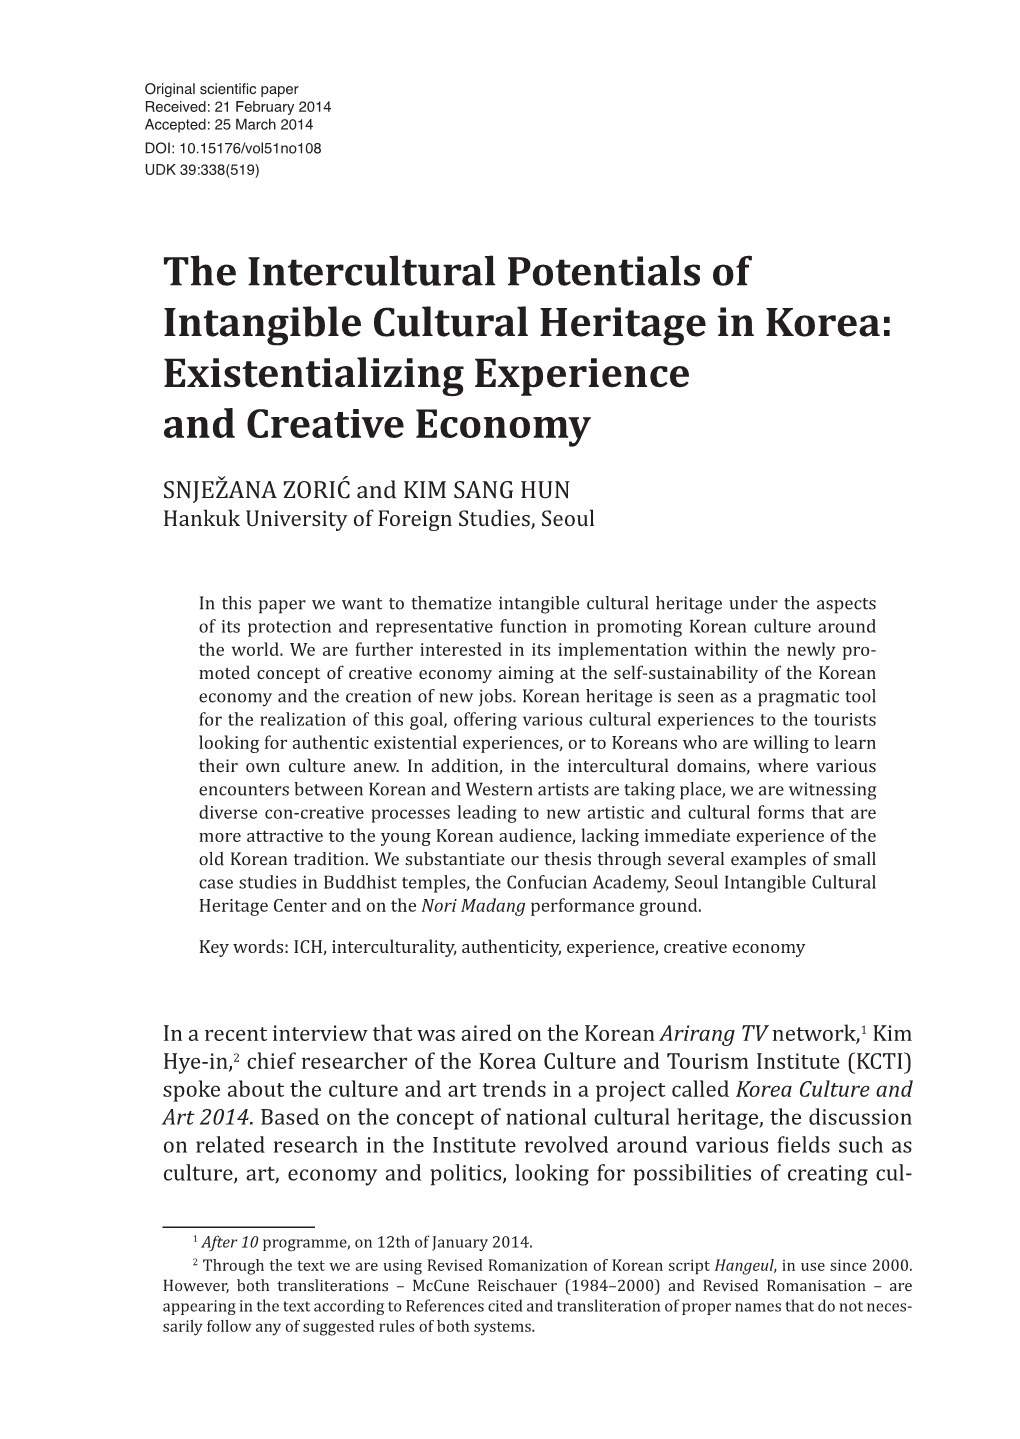 The Intercultural Potentials of Intangible Cultural Heritage in Korea: Existentializing Experience and Creative Economy